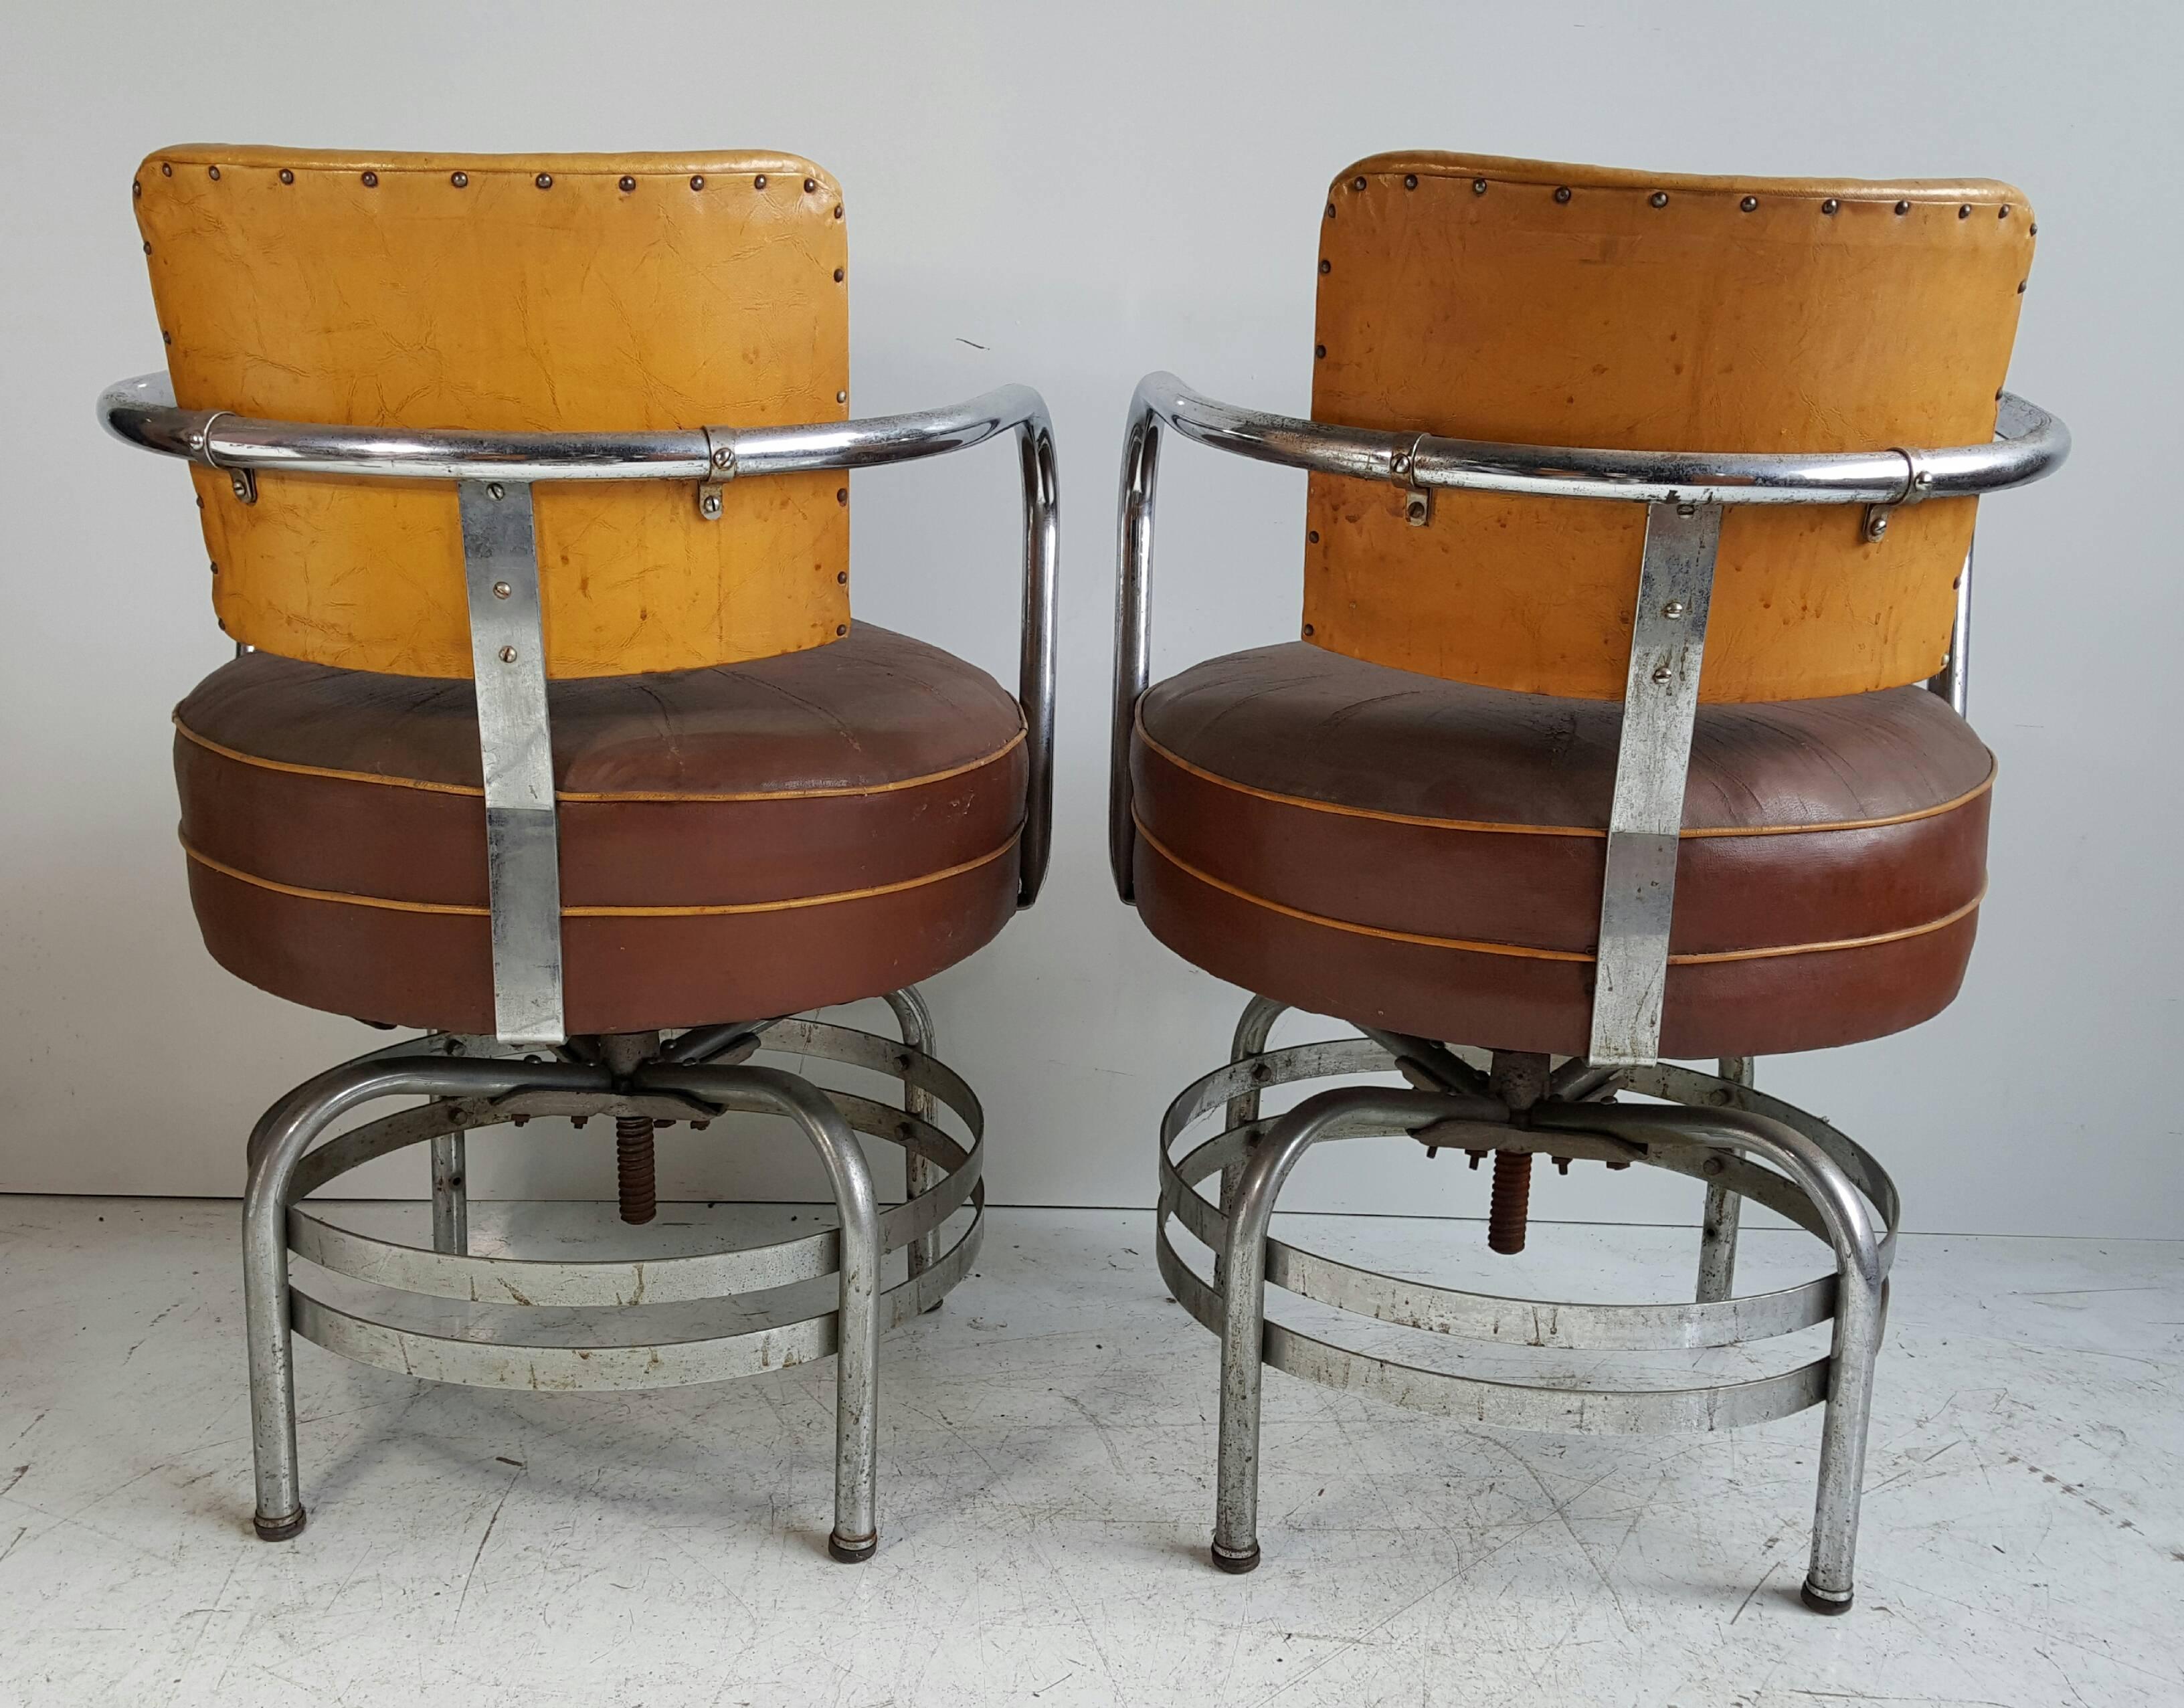 American Art Deco / Machine Age Tubular Chrome Swivel Armchairs In Distressed Condition For Sale In Buffalo, NY